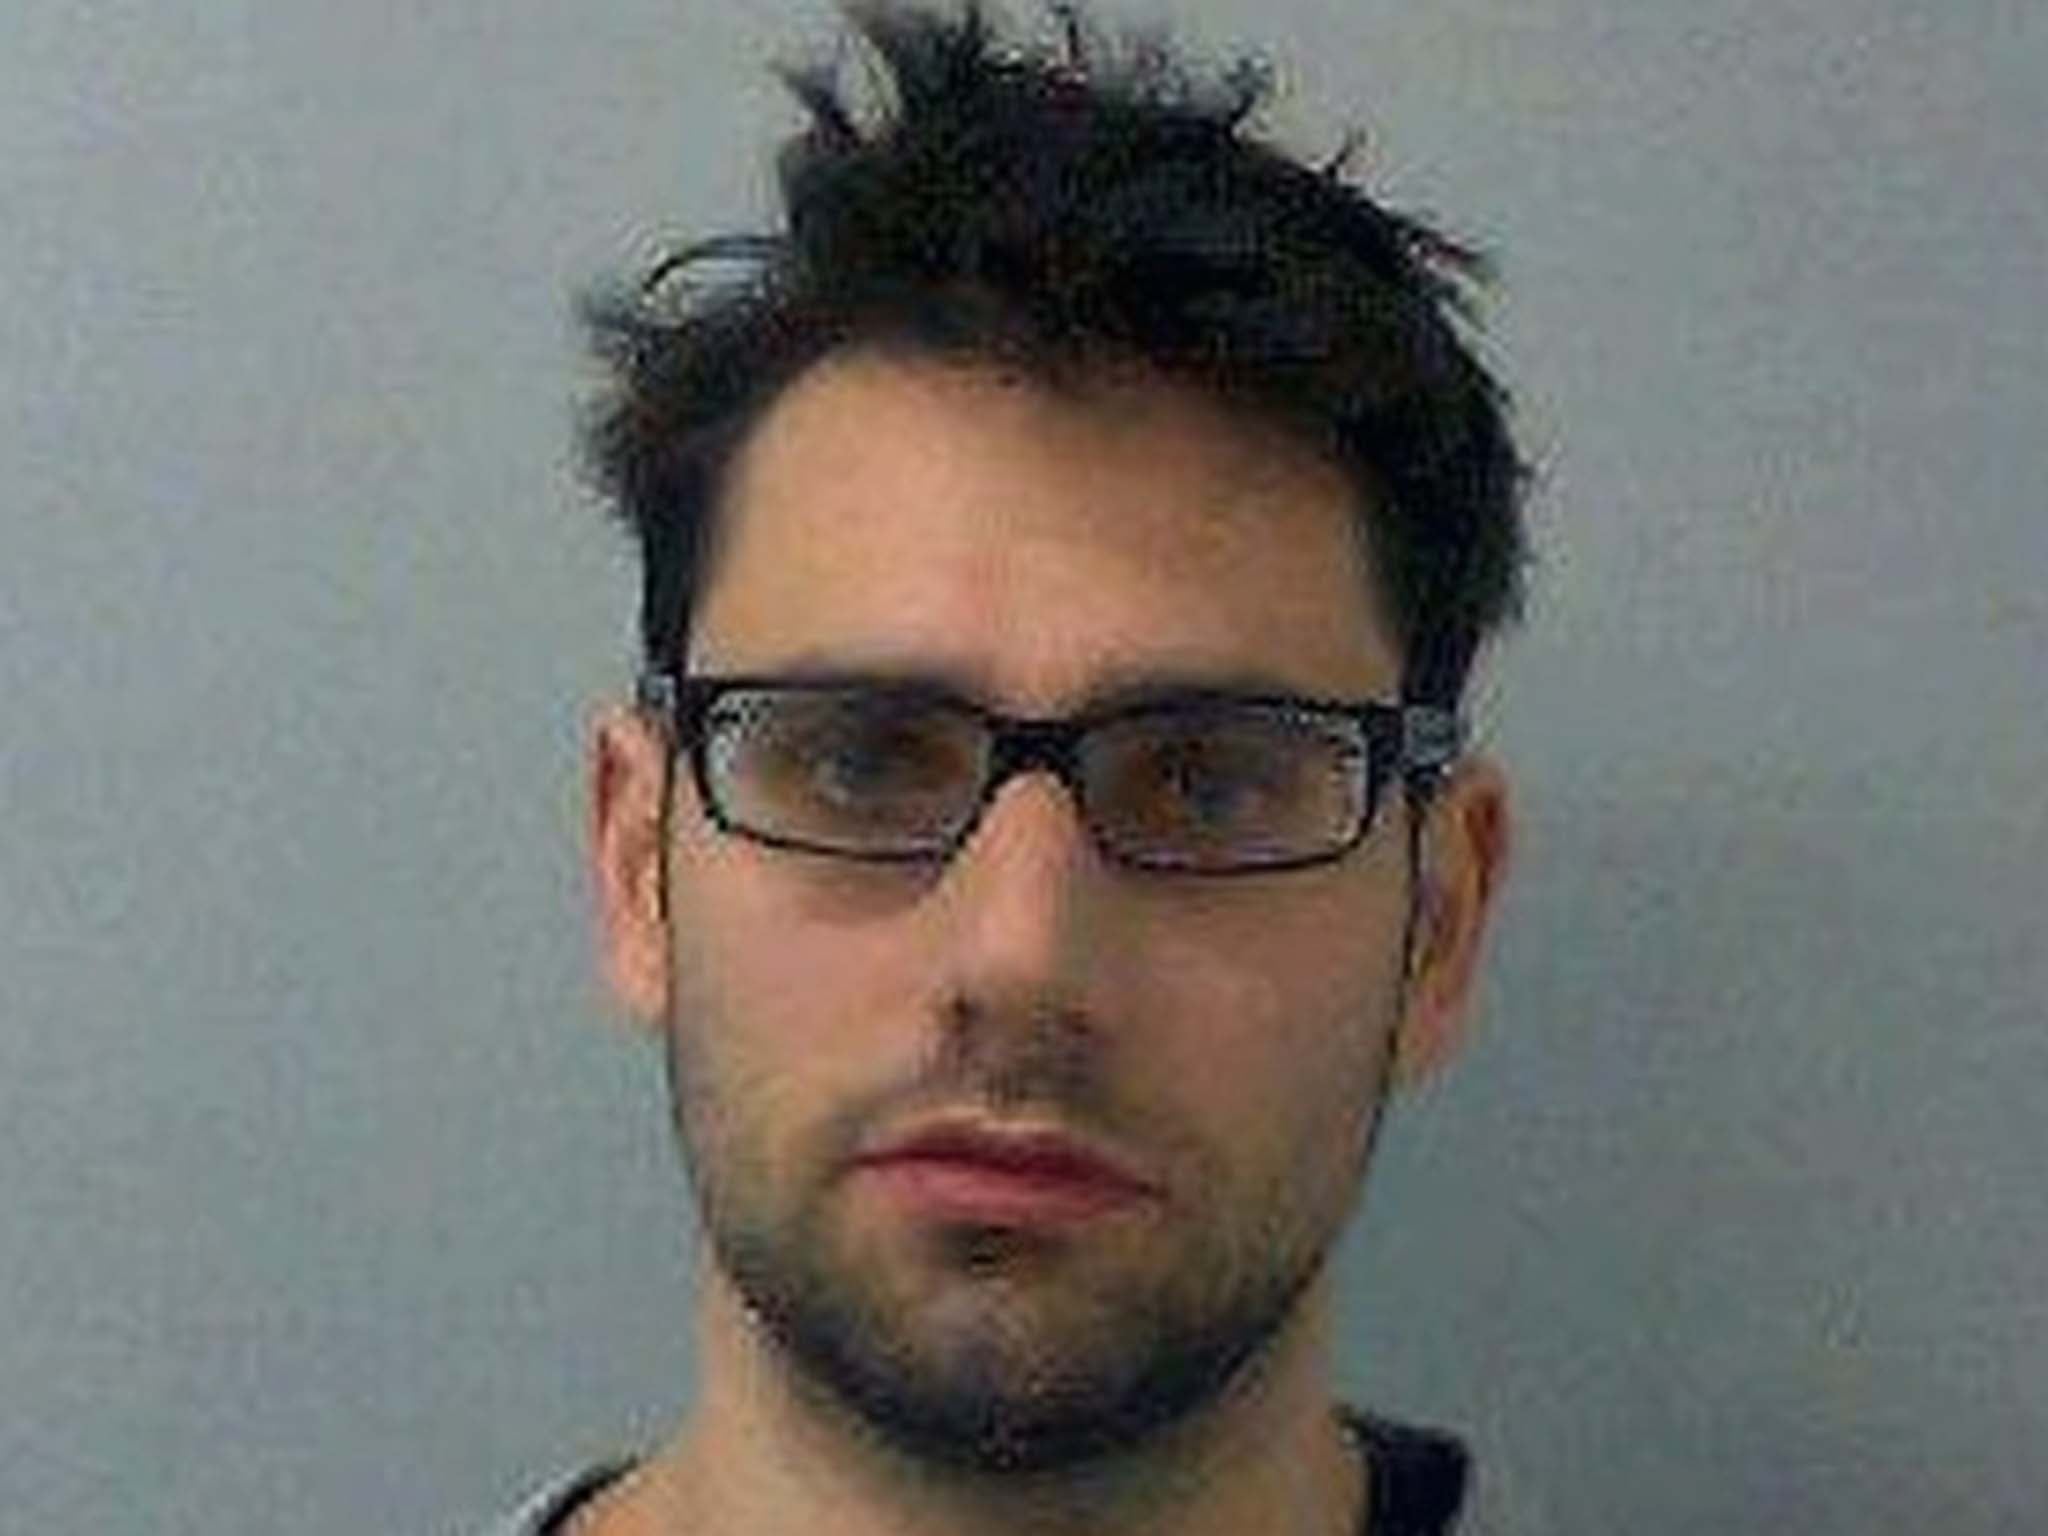 Xxx Raping Style - Senior male nurse filmed himself raping unconscious women in A&E | The  Independent | The Independent